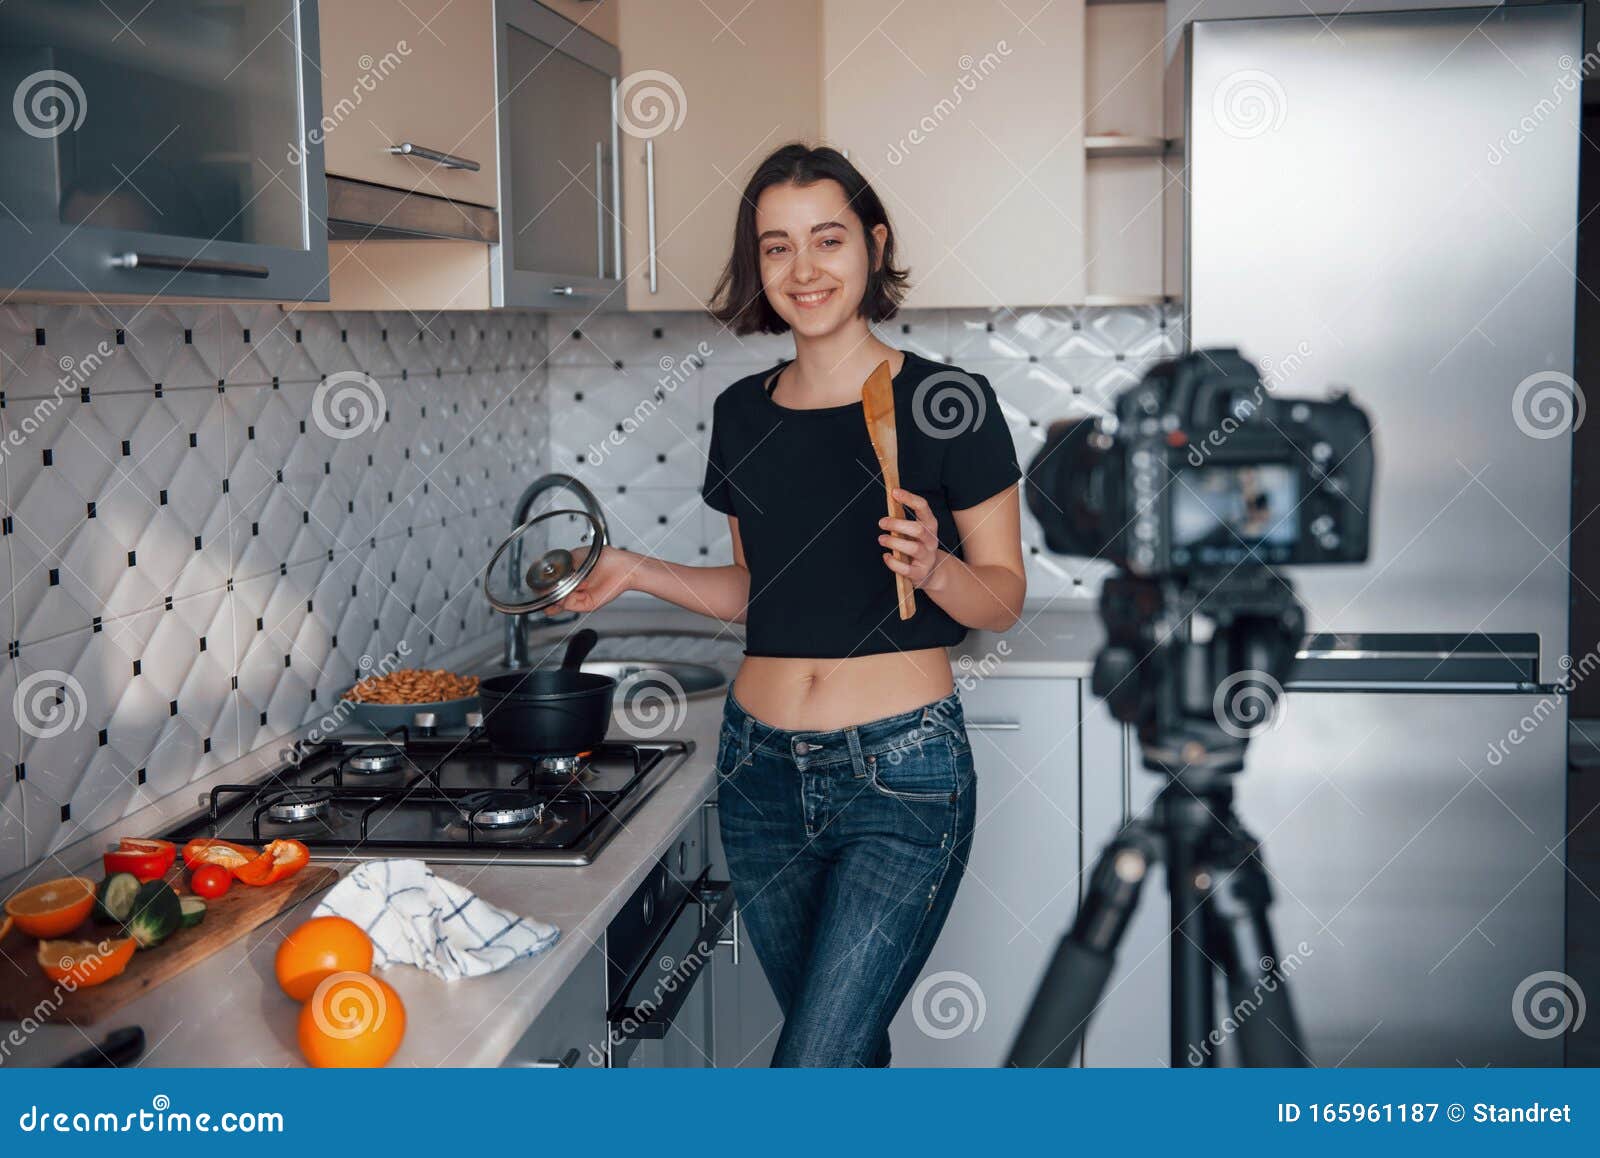 Happy Model Making Food Girl In The Modern Kitchen At Home At Her 